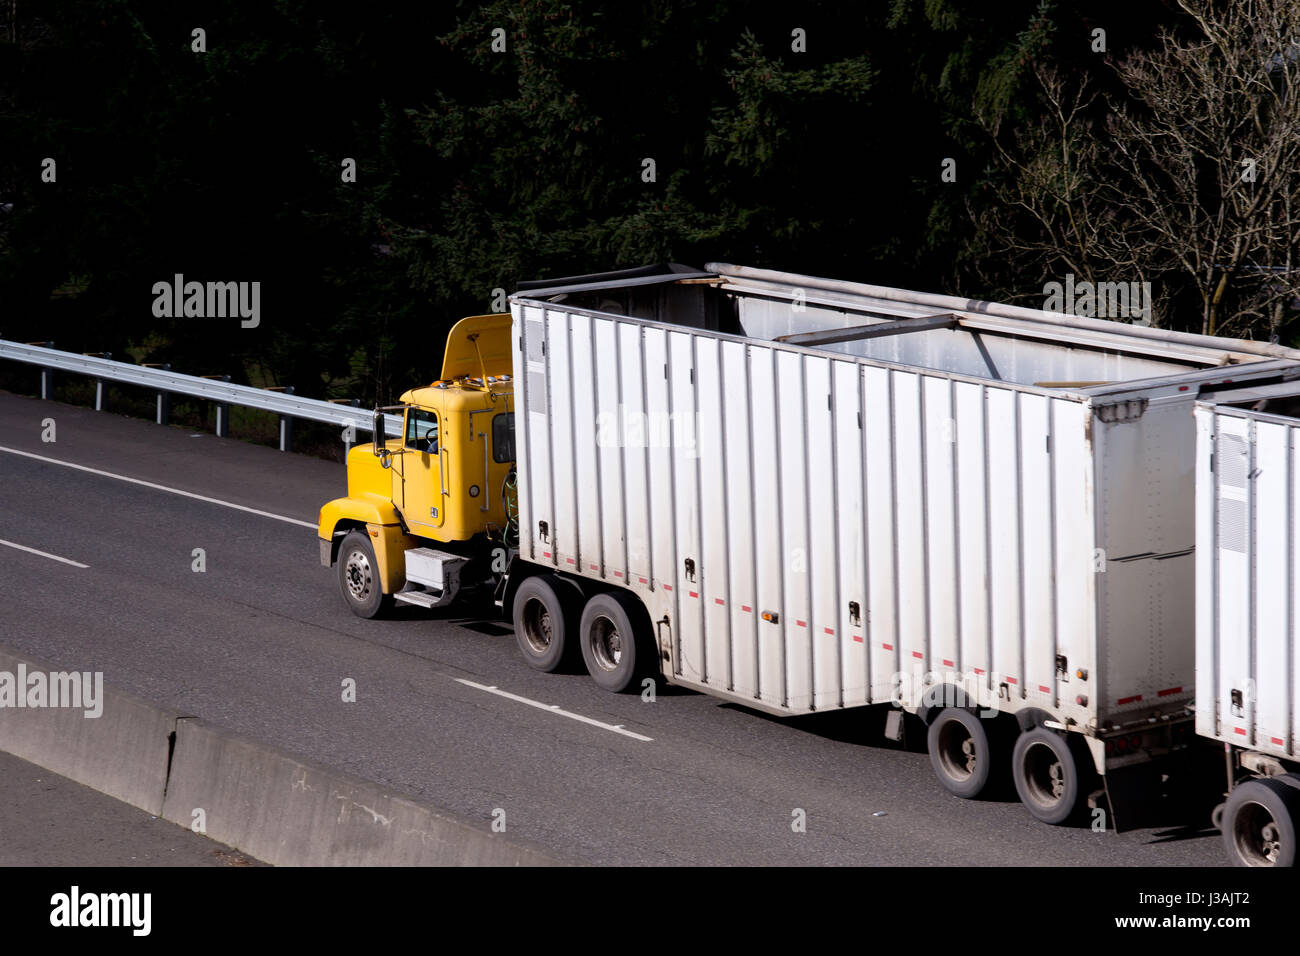 Professional Yellow powerful American semi truck for local transportation of commercial cargo is pulling open tandem trailers for bulk cargo Stock Photo